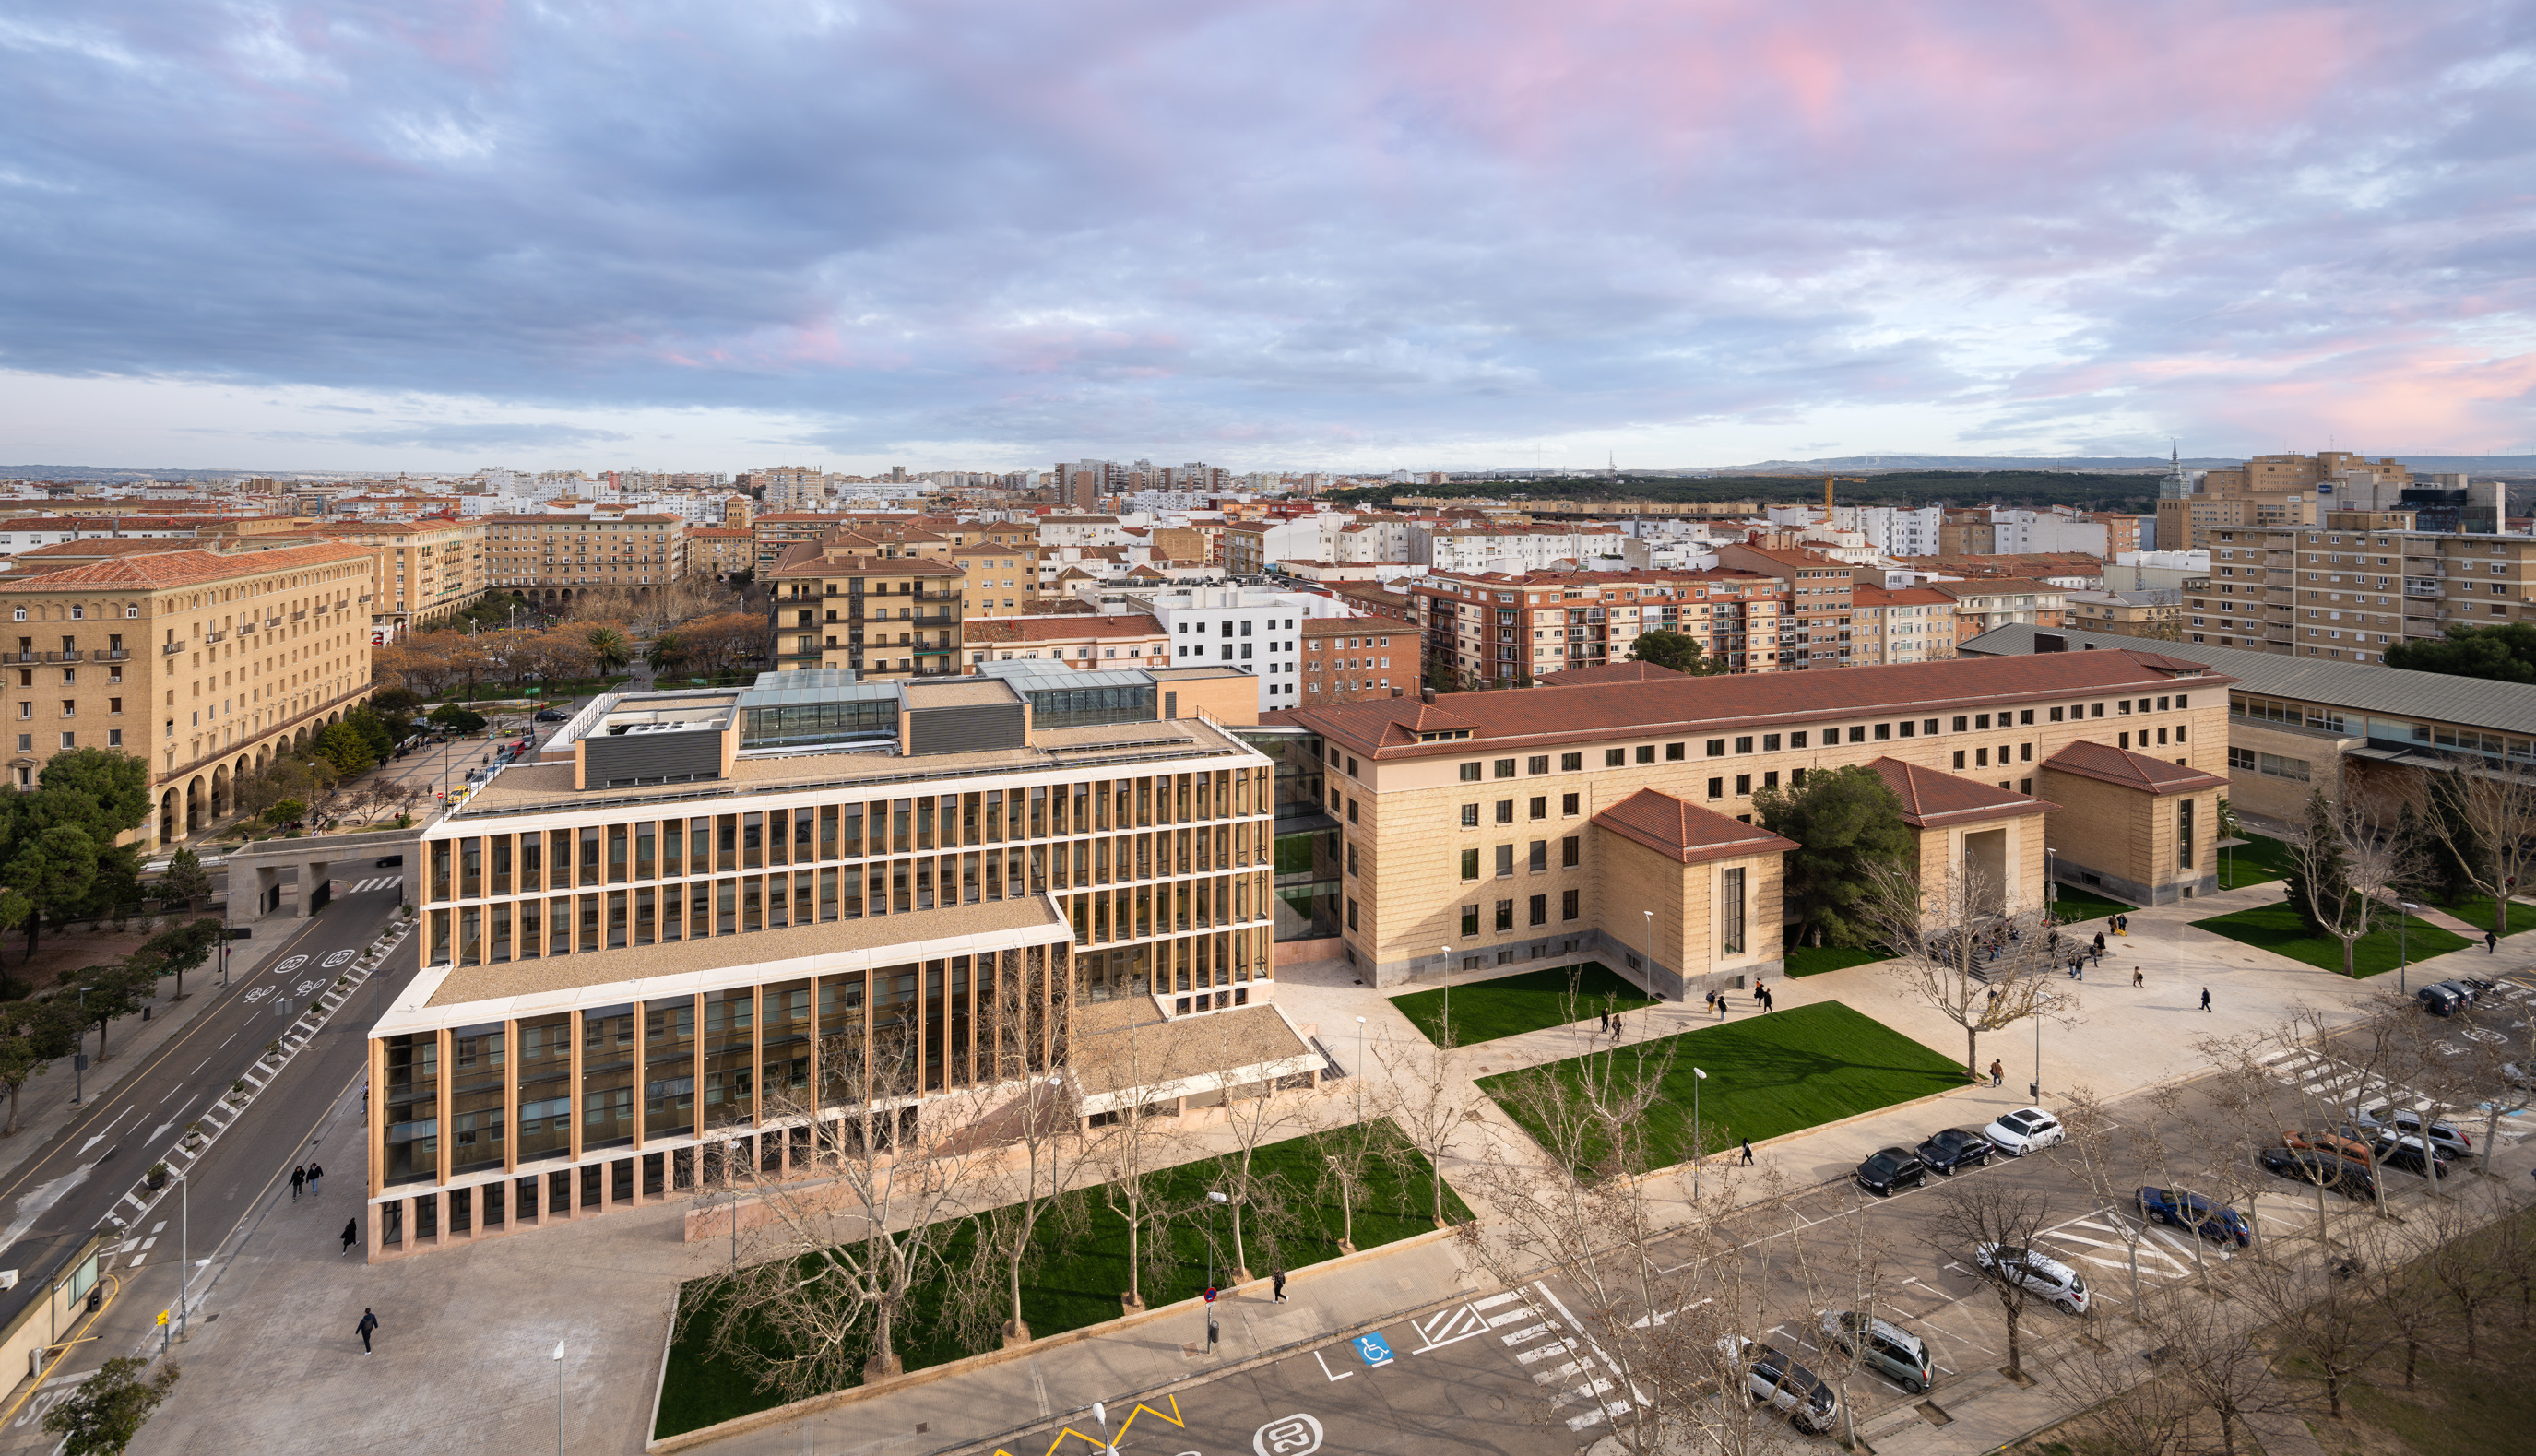 Renovation and extension of the University of Zaragoza’s Philosophy and Letters Faculty